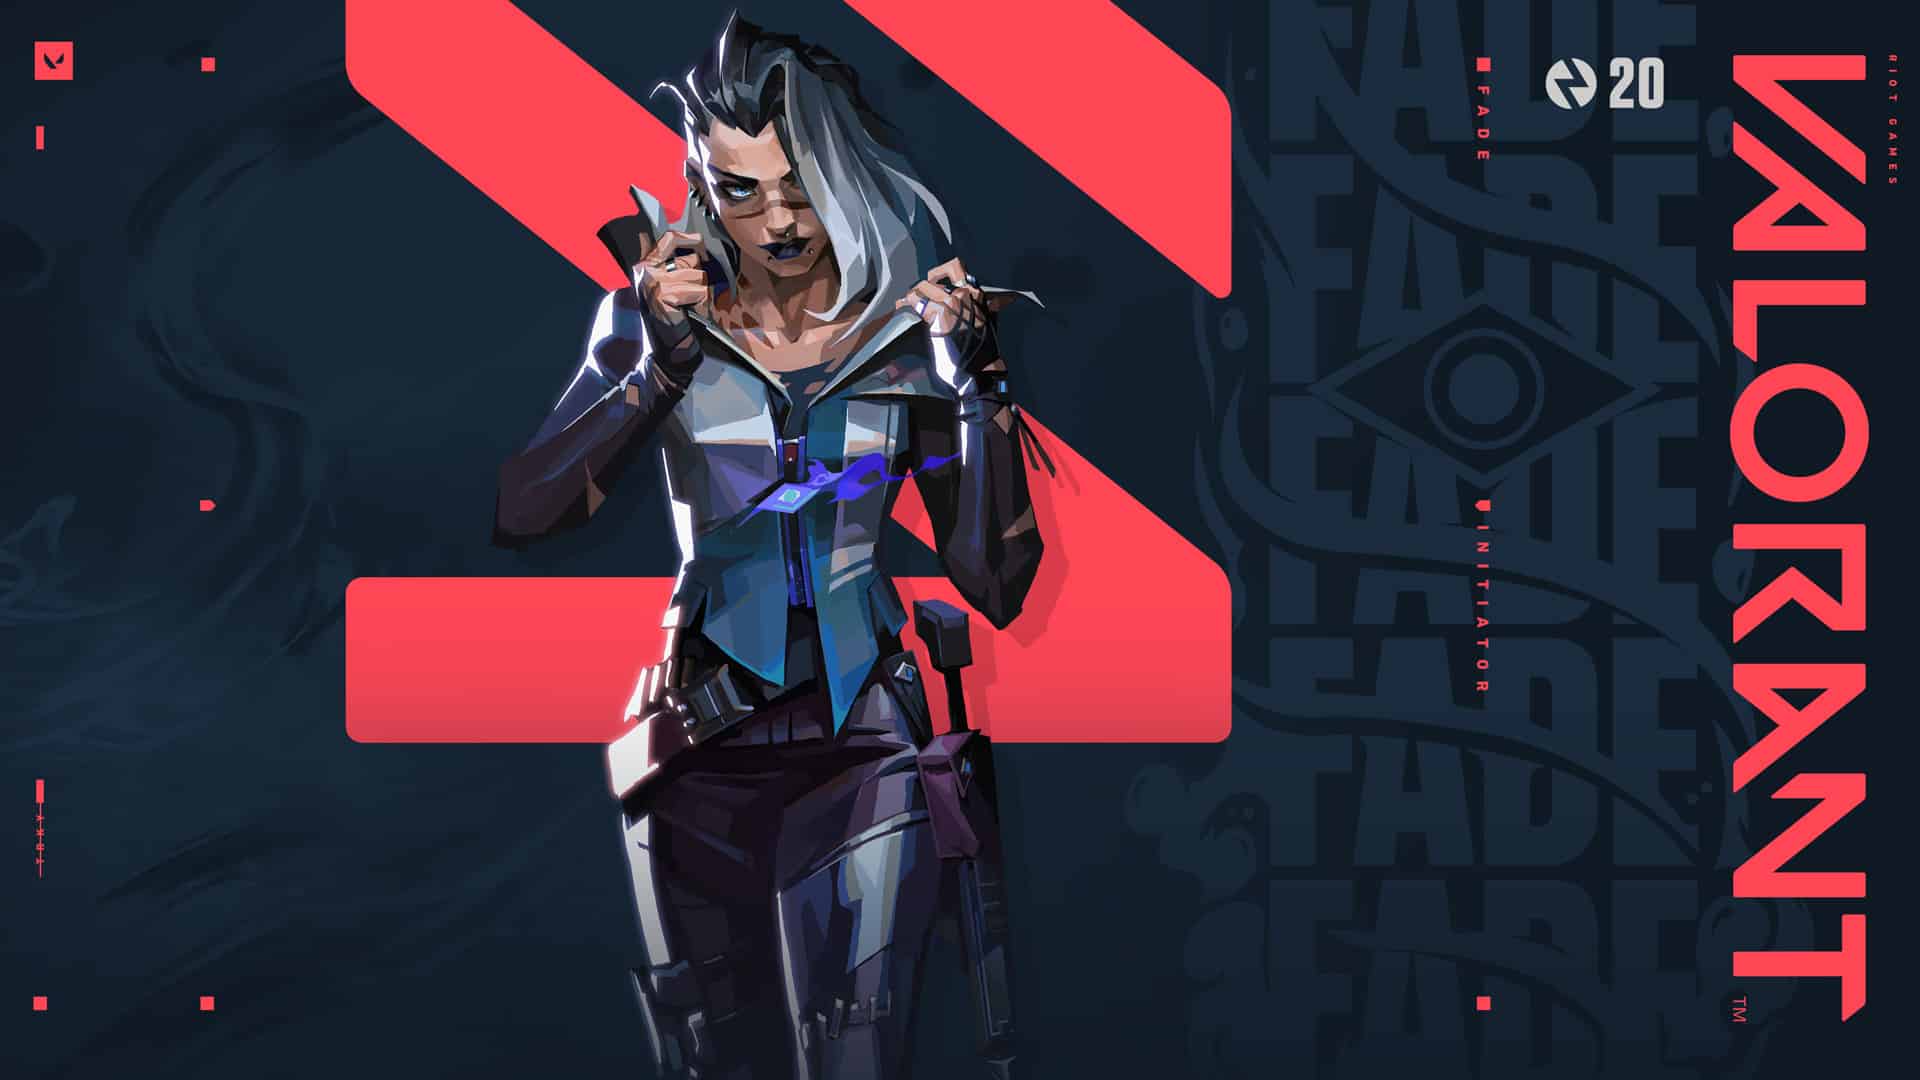 Fade from Valorant with the game's logo and text behind her